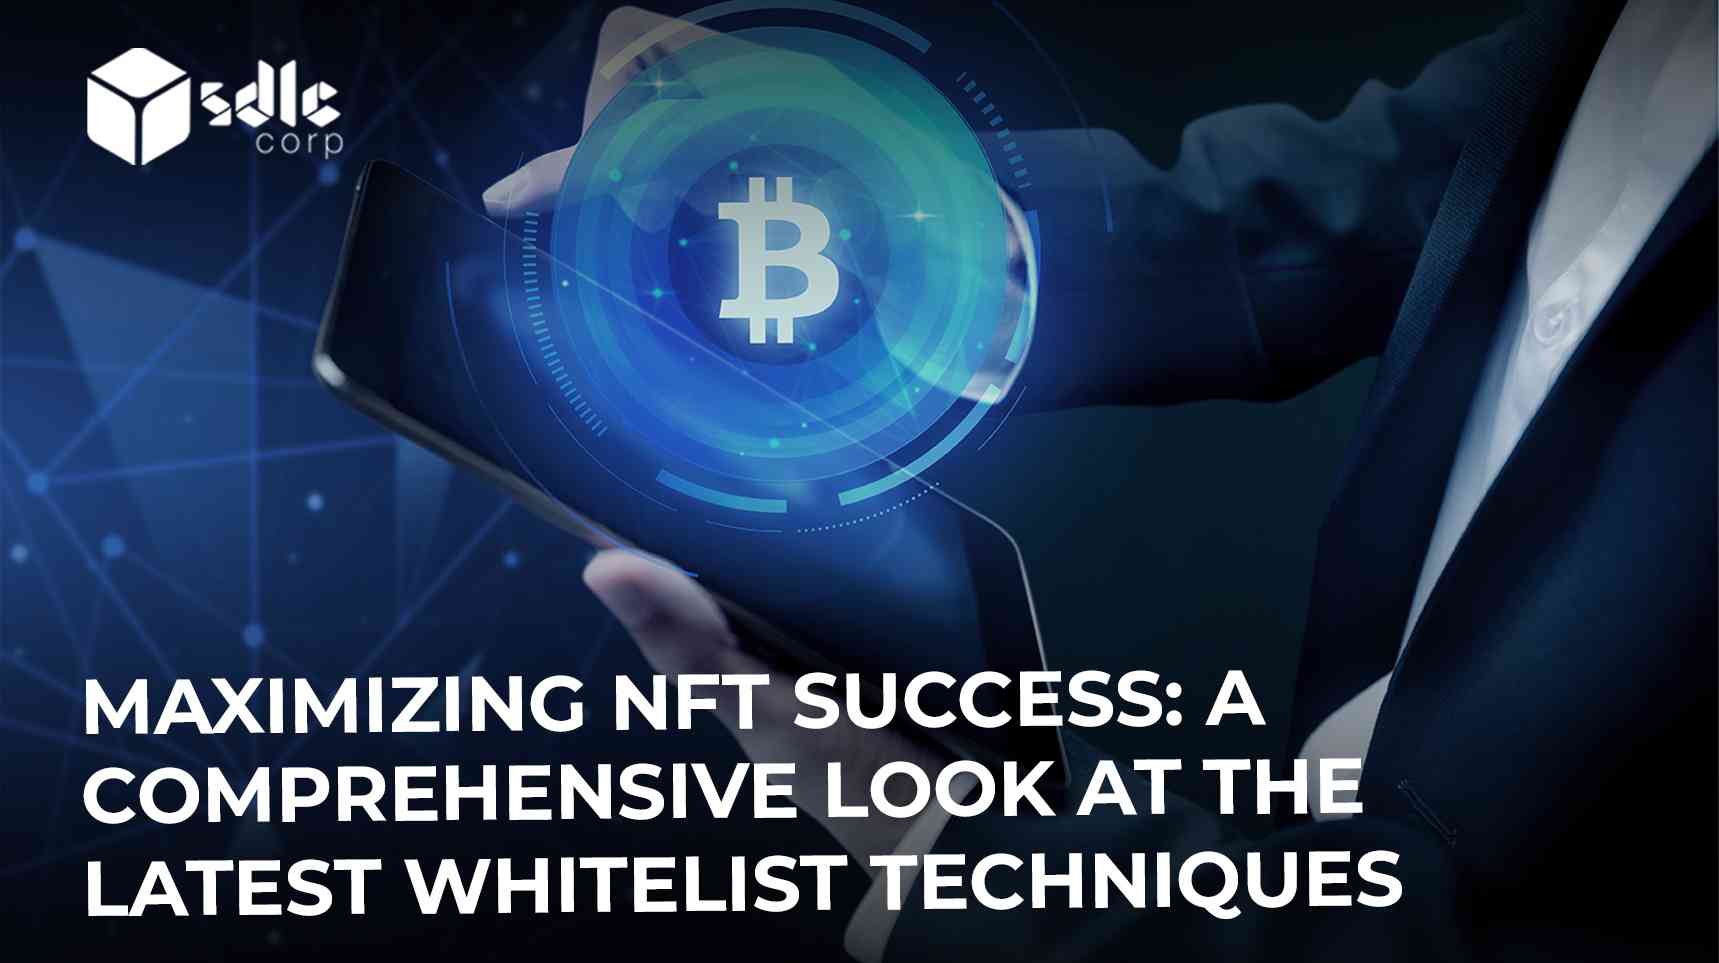 Maximizing NFT Success A Comprehensive Look at the Latest Whitelist Techniques and Attracting High Value Buyer Personas